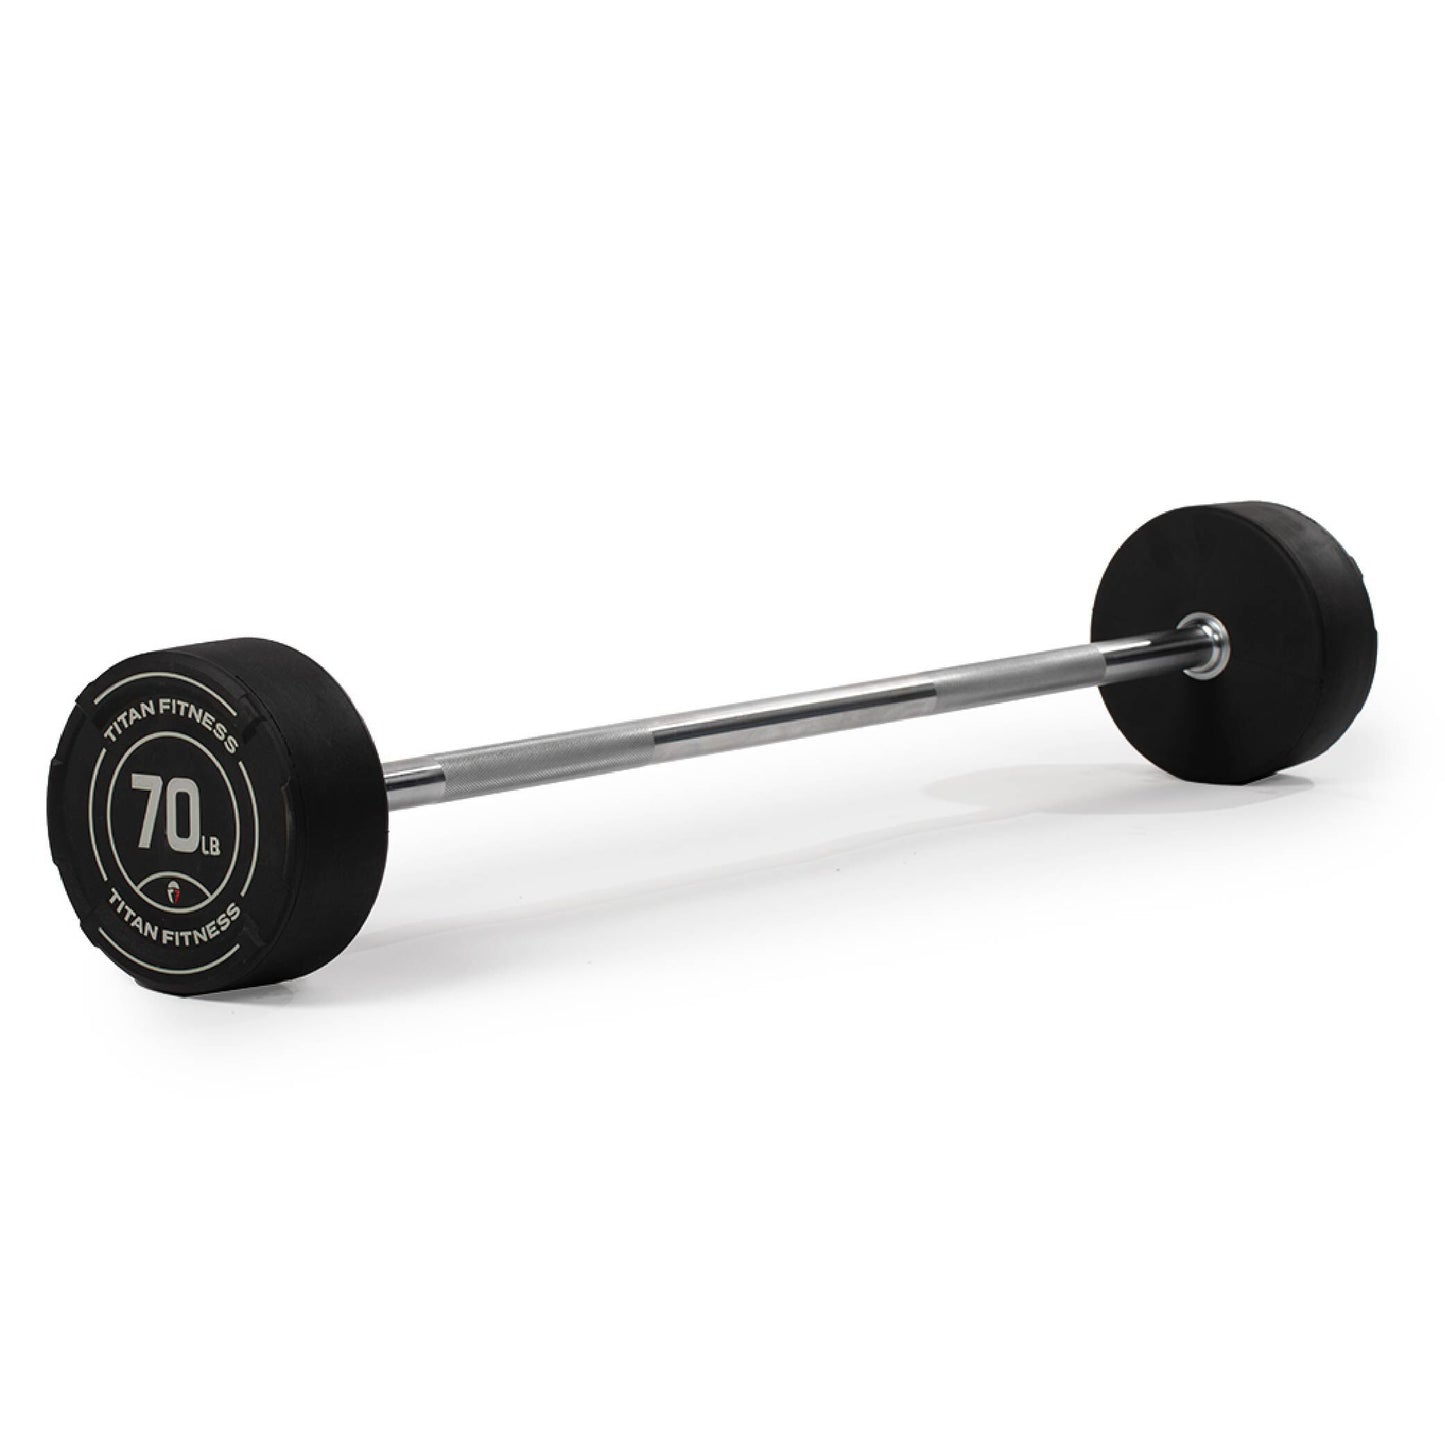 70 LB Straight Fixed Rubber Barbell - view 1